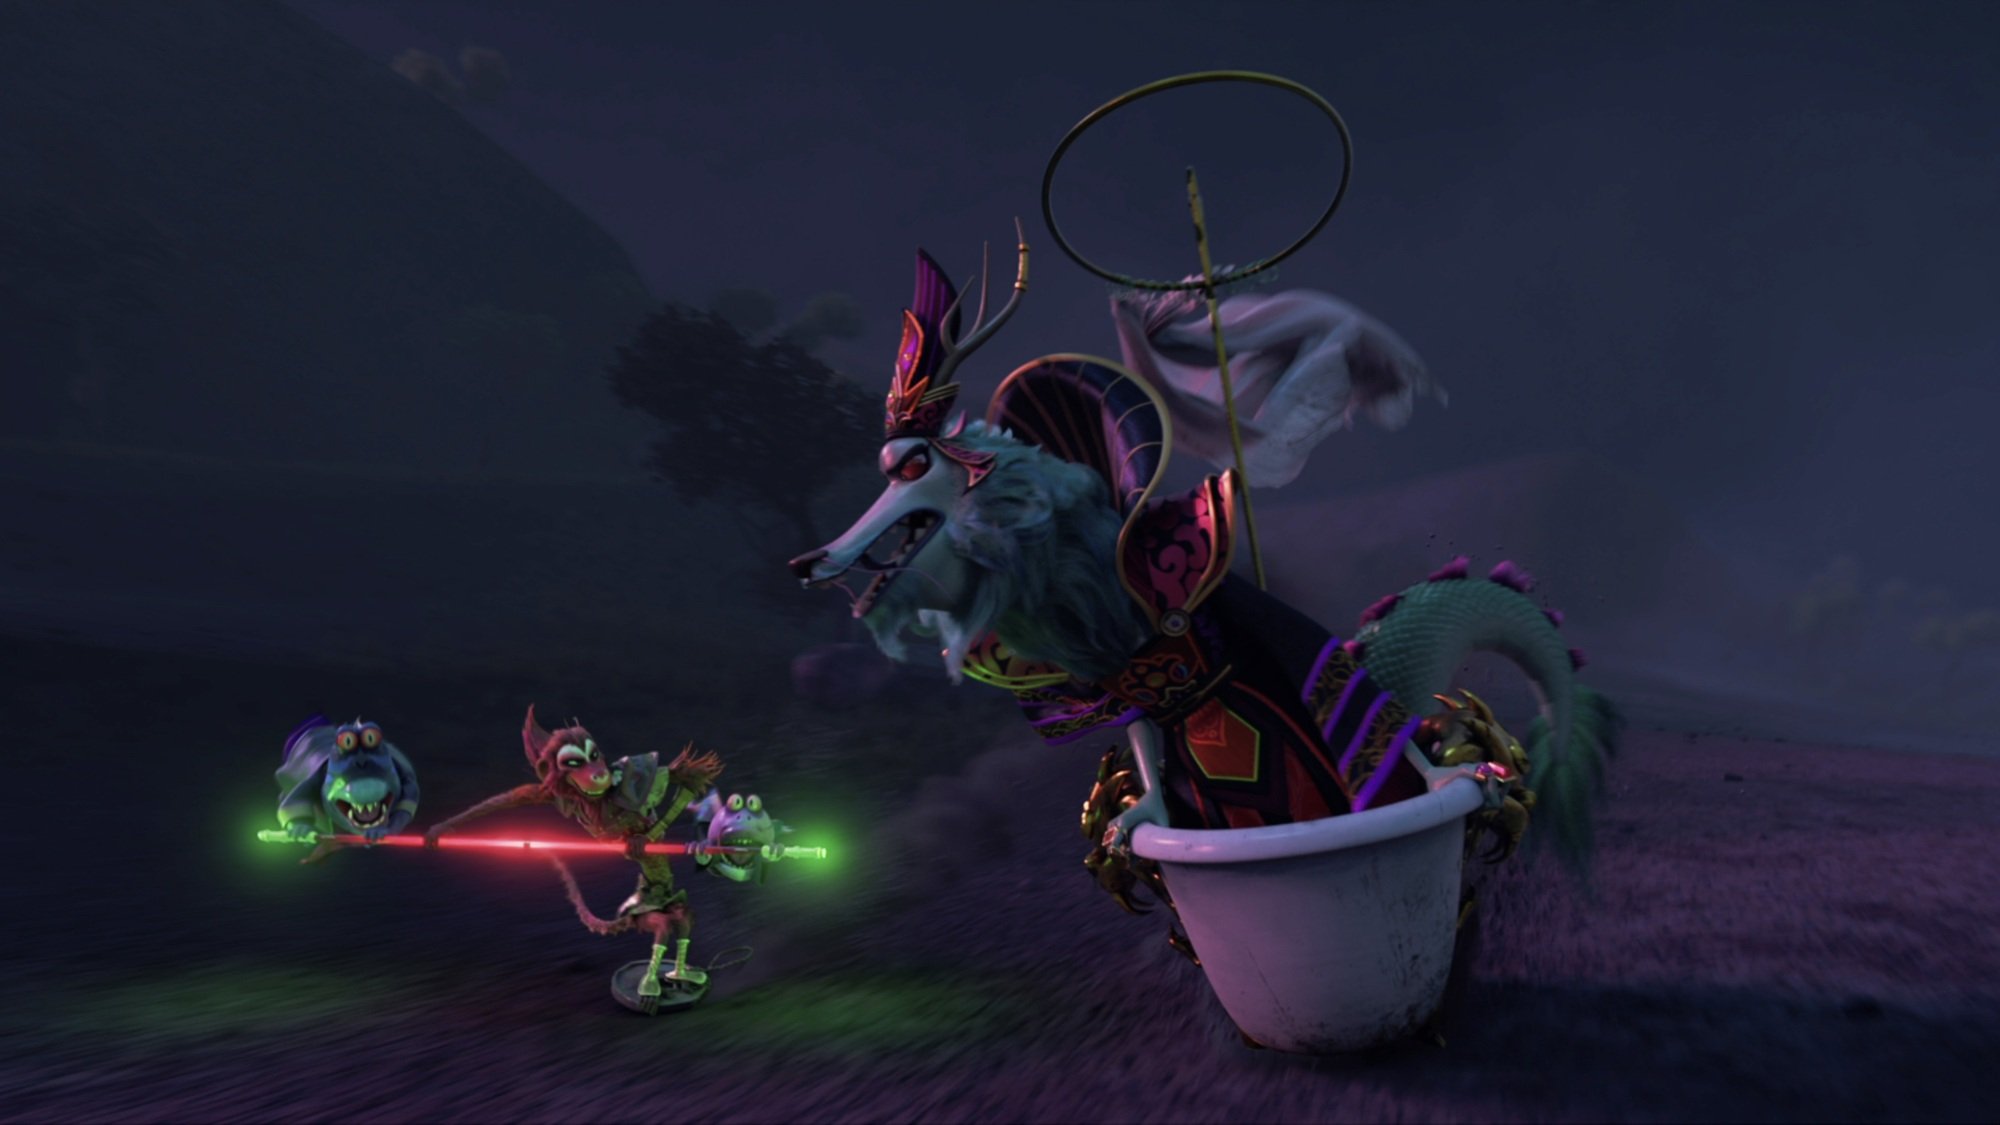 A blue dragon in a bathtub chases down a red armored monkey holding a glowing staff.